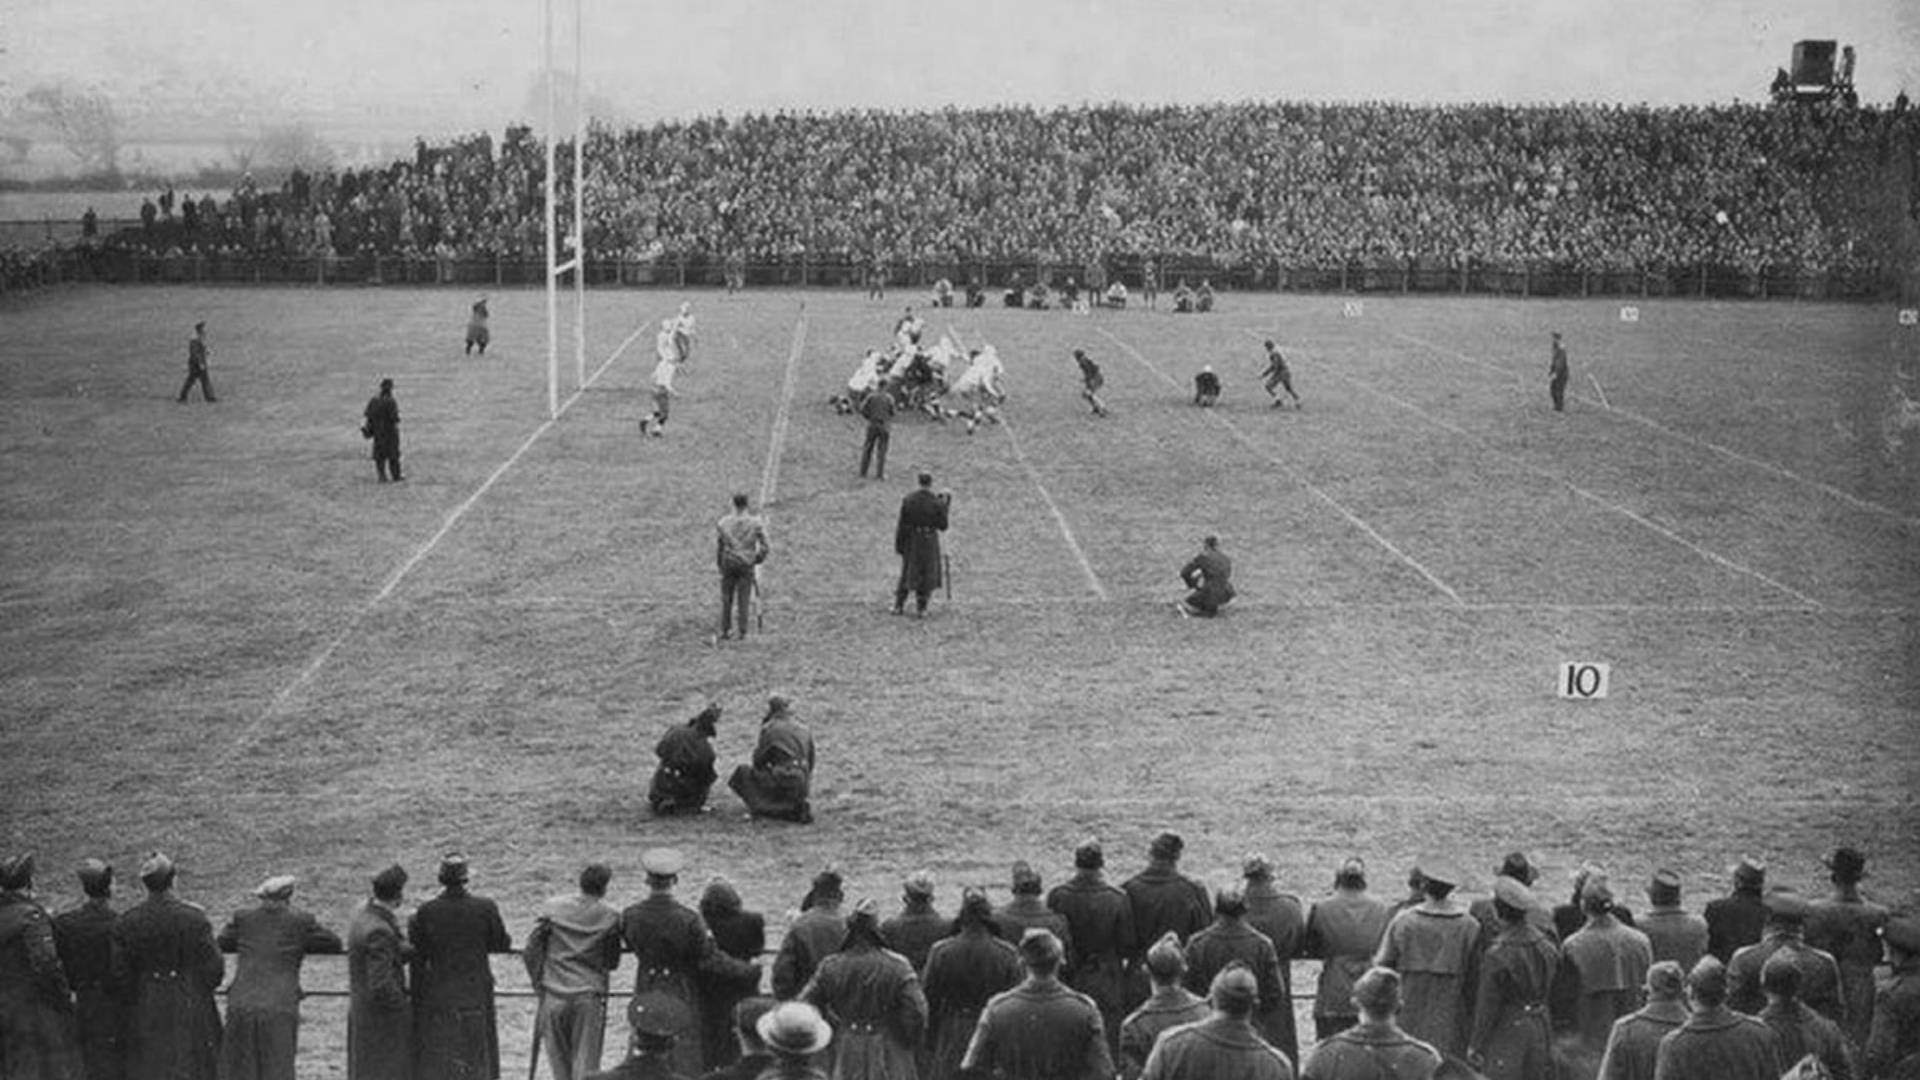 United States military teams 'Yarvard' and 'Hale' compete in the first game of American Football played in the European Theater of Operations during the Second World War. 'Hale' won the encounter 9-7 at Ravenhill Stadium, Belfast on 14th November 1942.